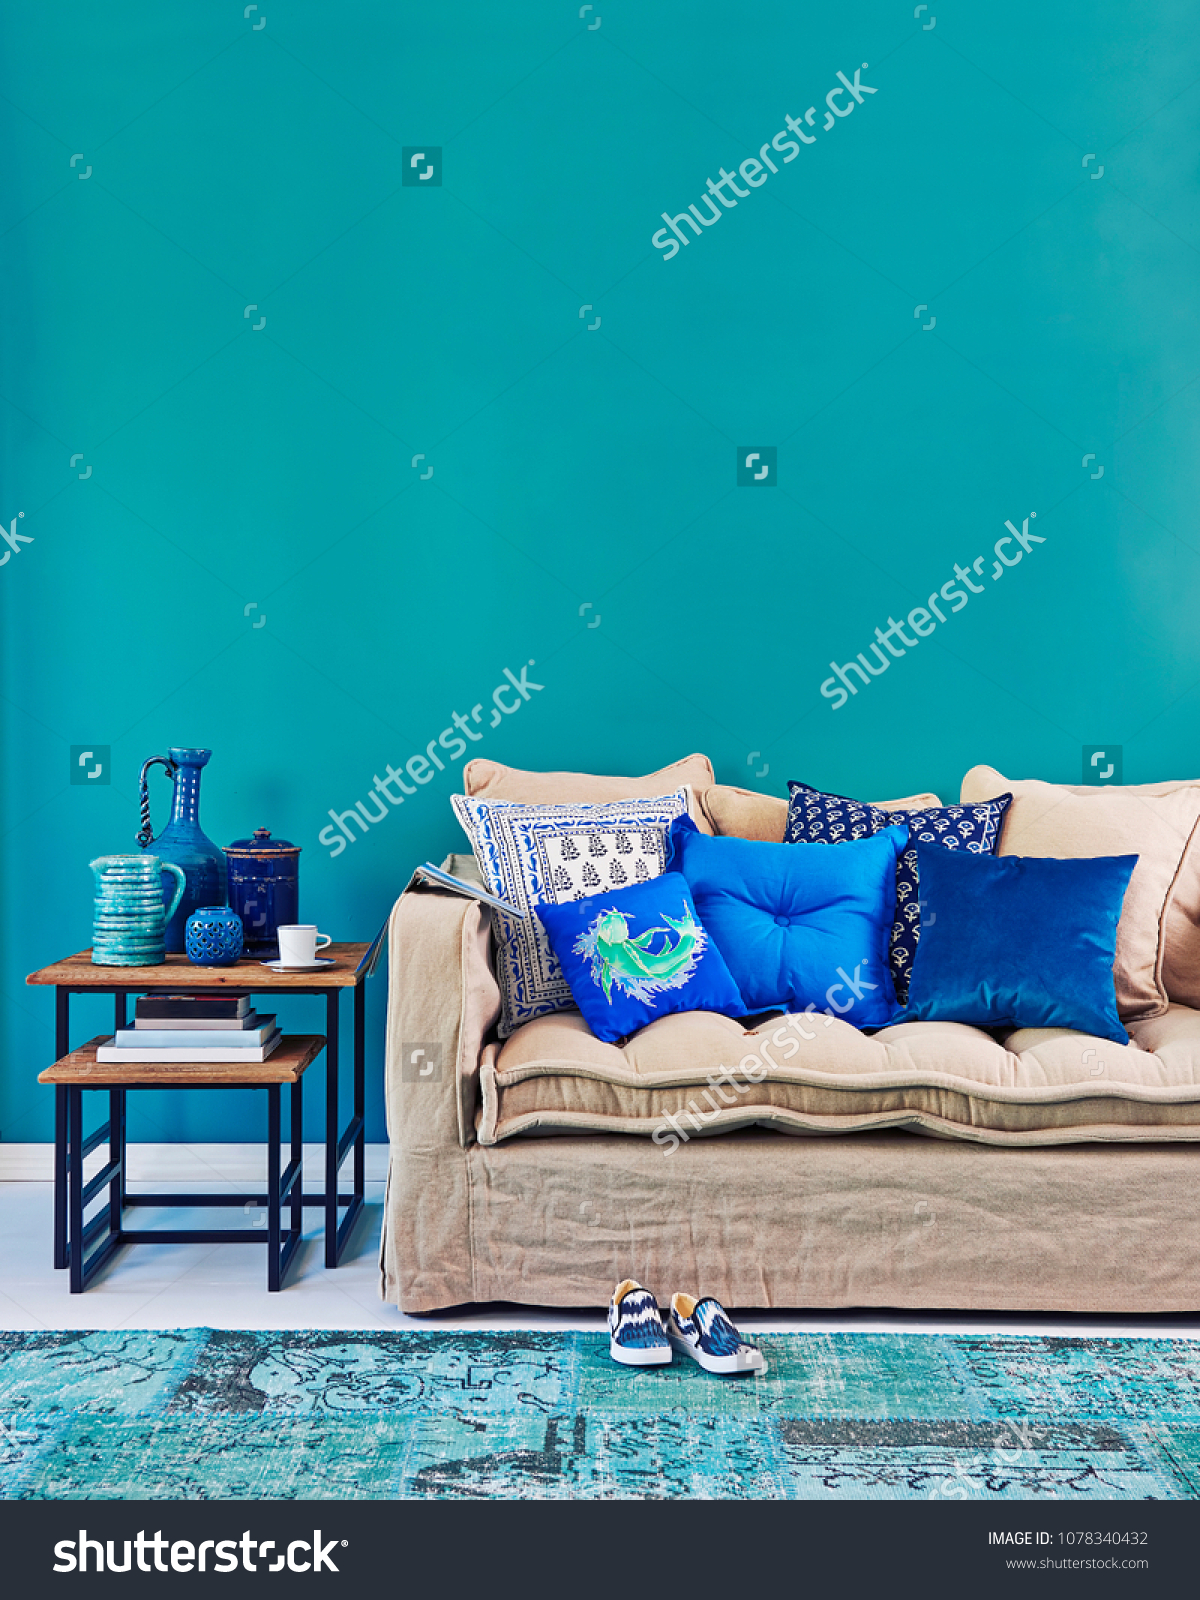 Modern Turquoise Living Room Concept Interior Stock Photo Edit Now 1078340432